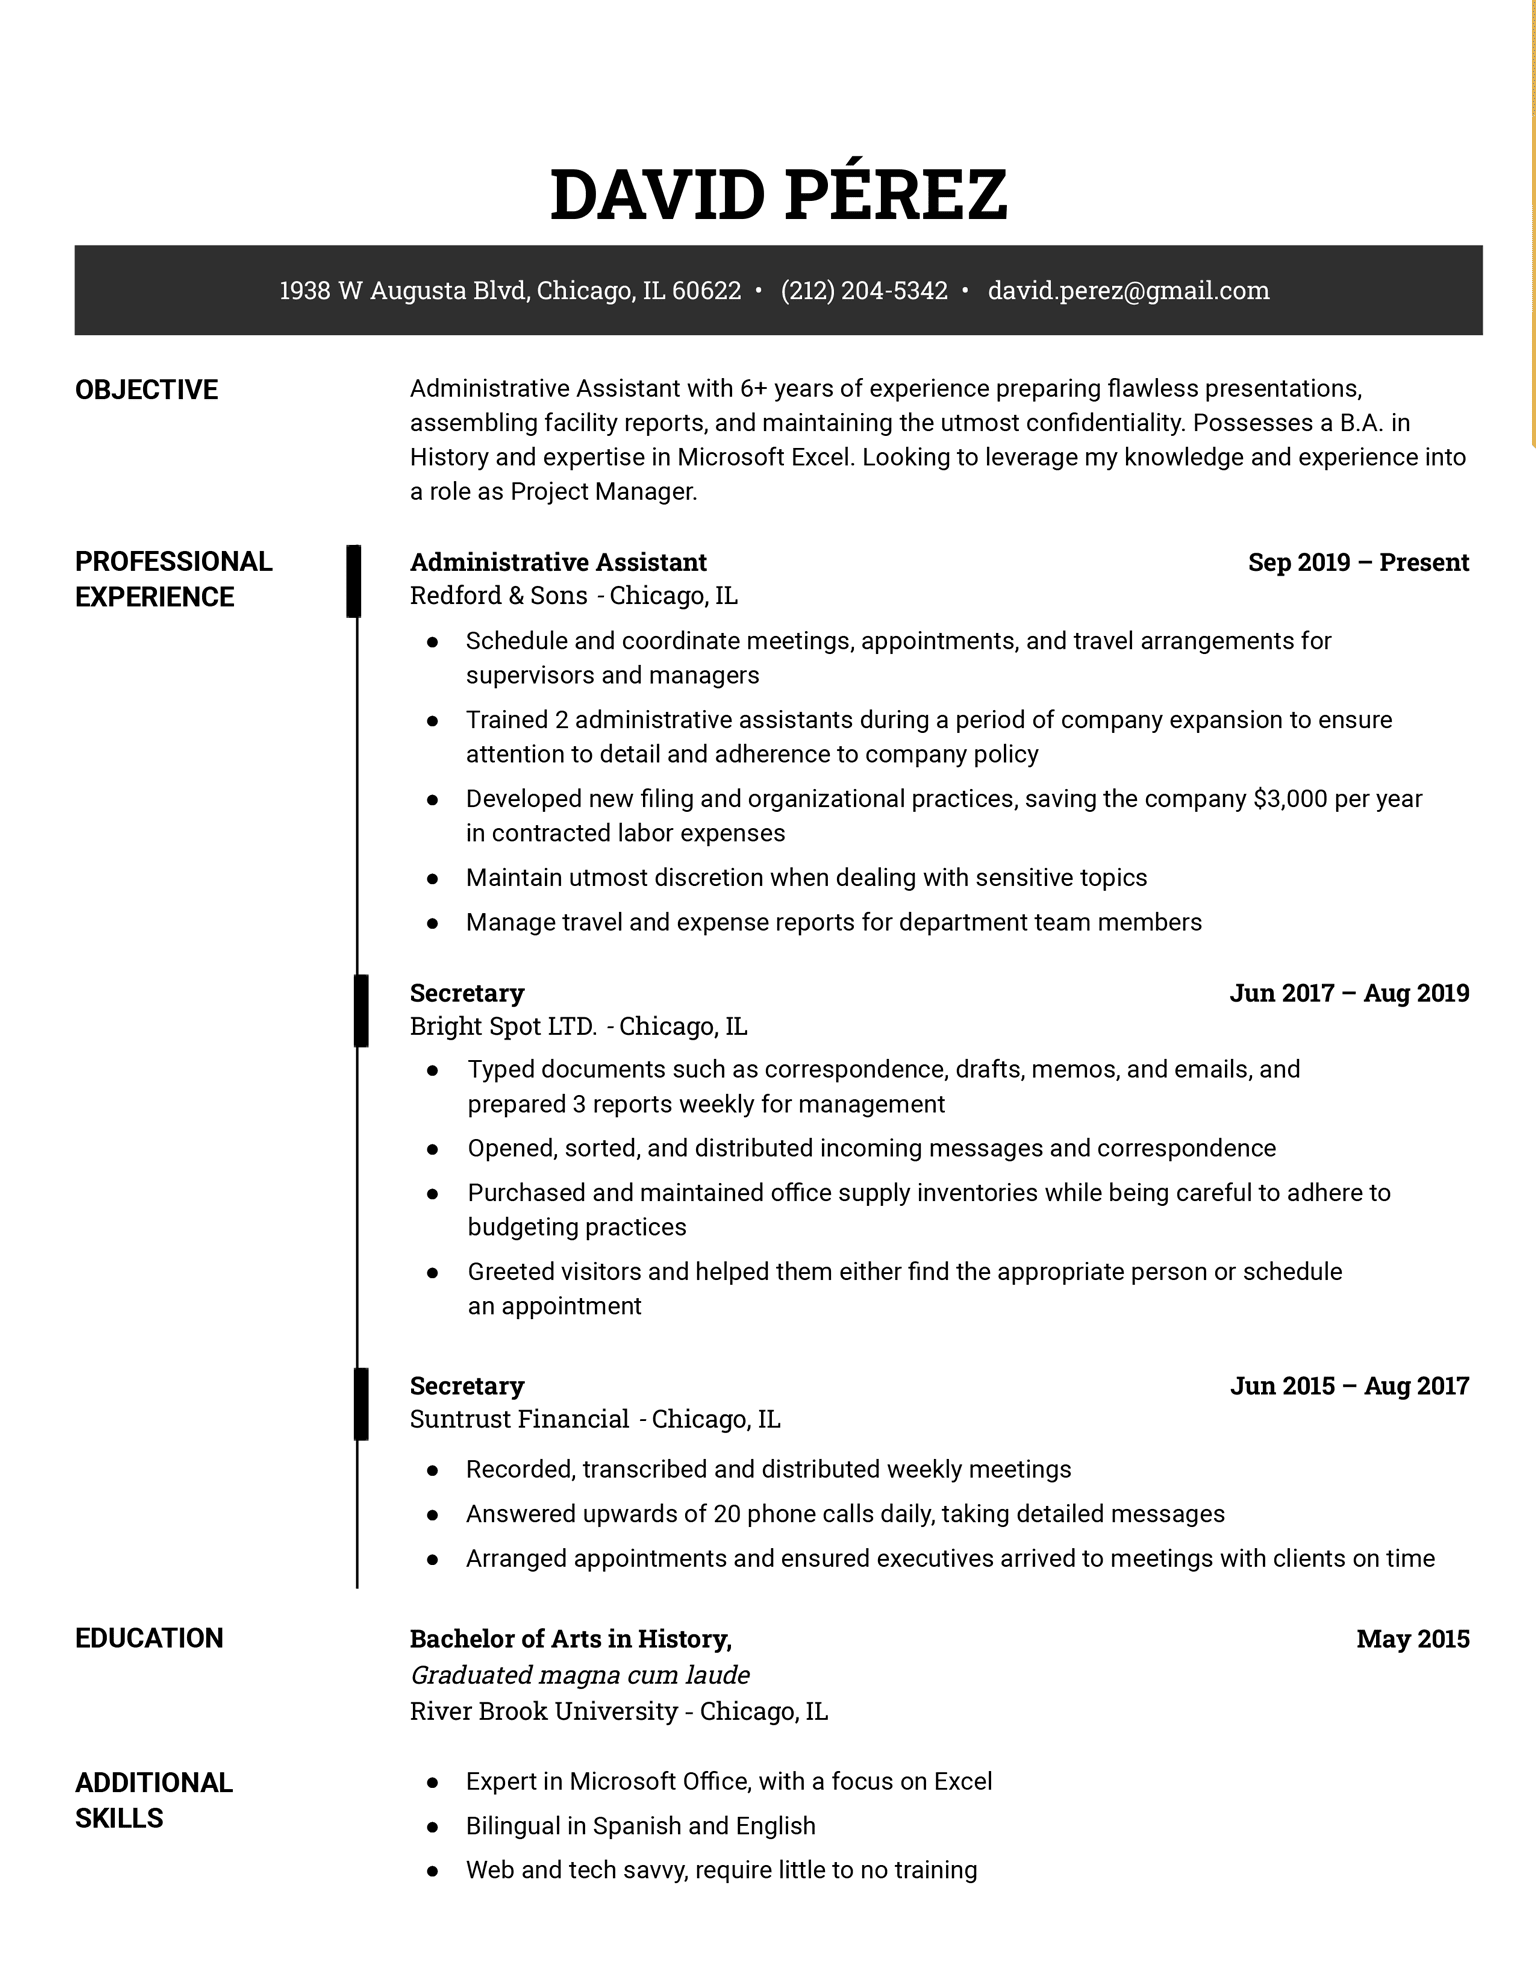 The Executive resume template for Google Docs in black.